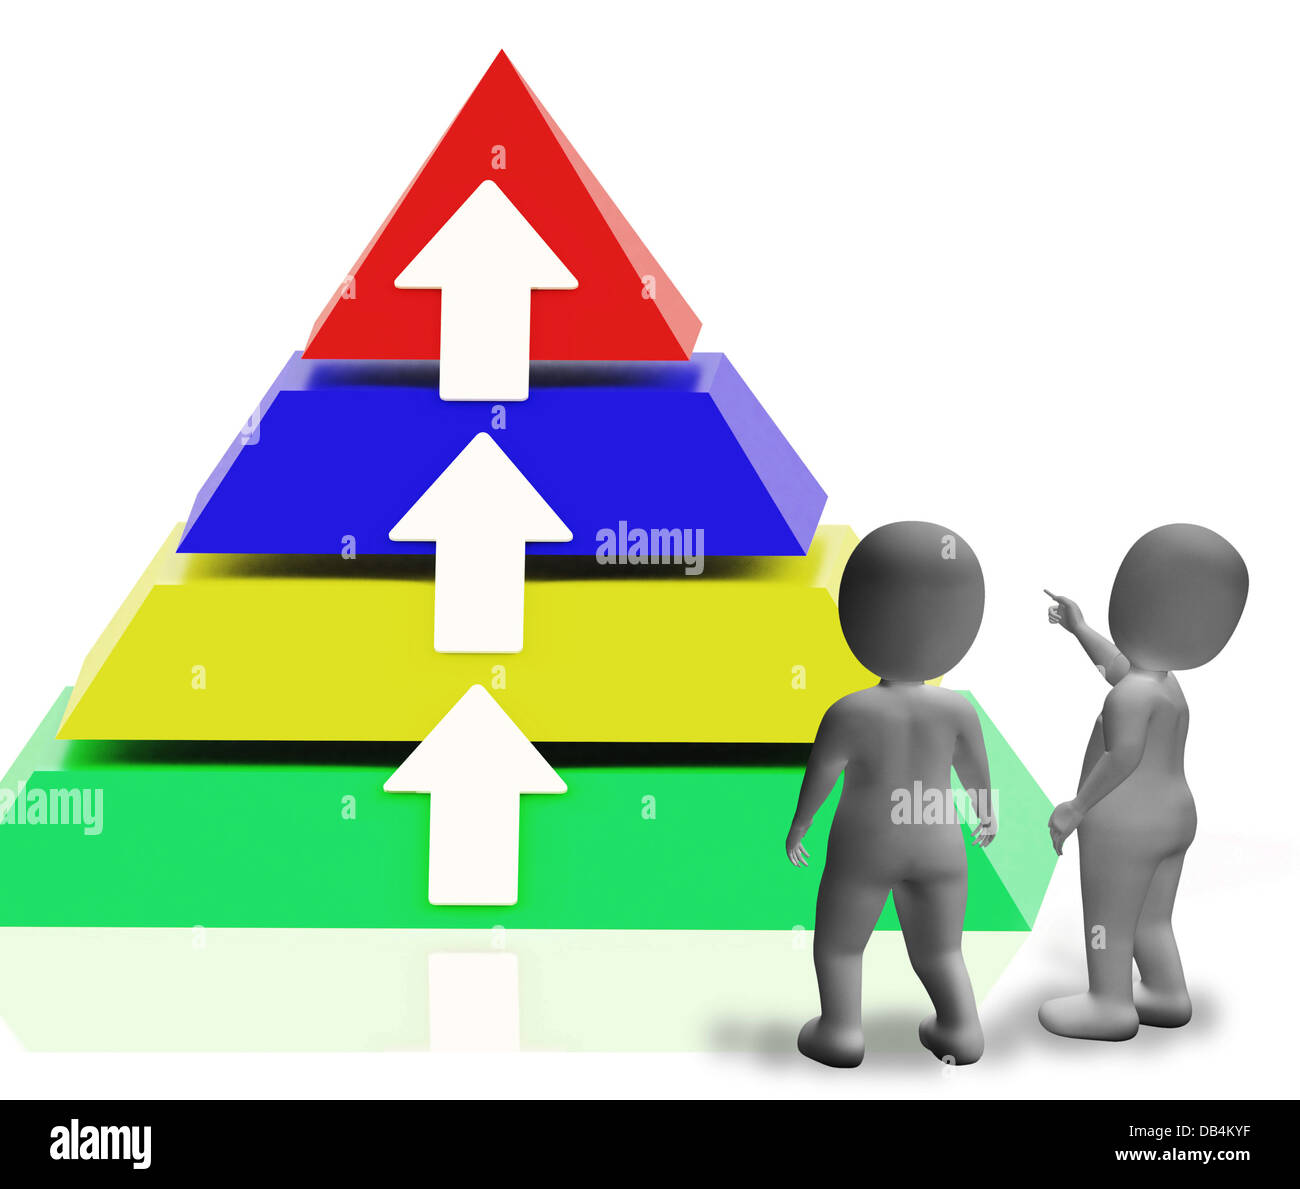 Pyramid With Up Arrows And Copyspace Showing Growth Or Progress Stock Photo